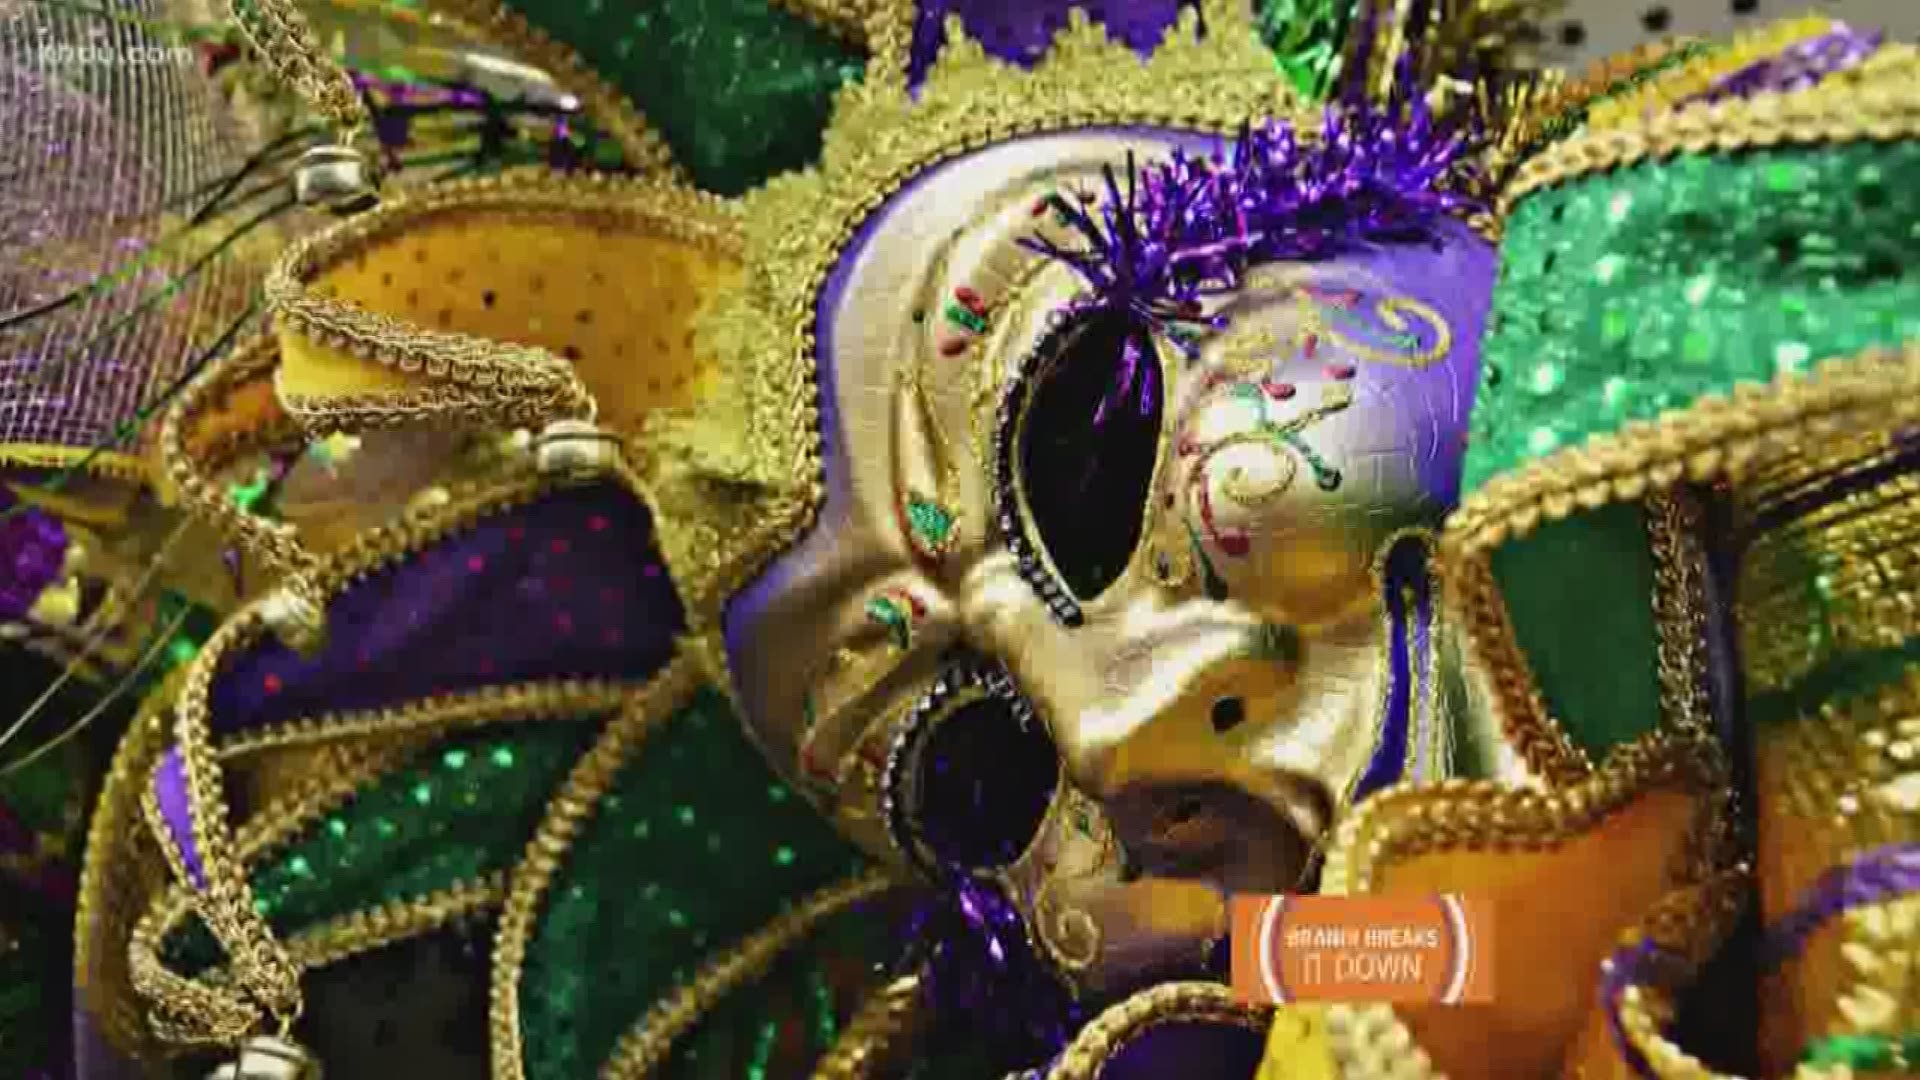 Everything you need to know for Mardi Gras in Galveston